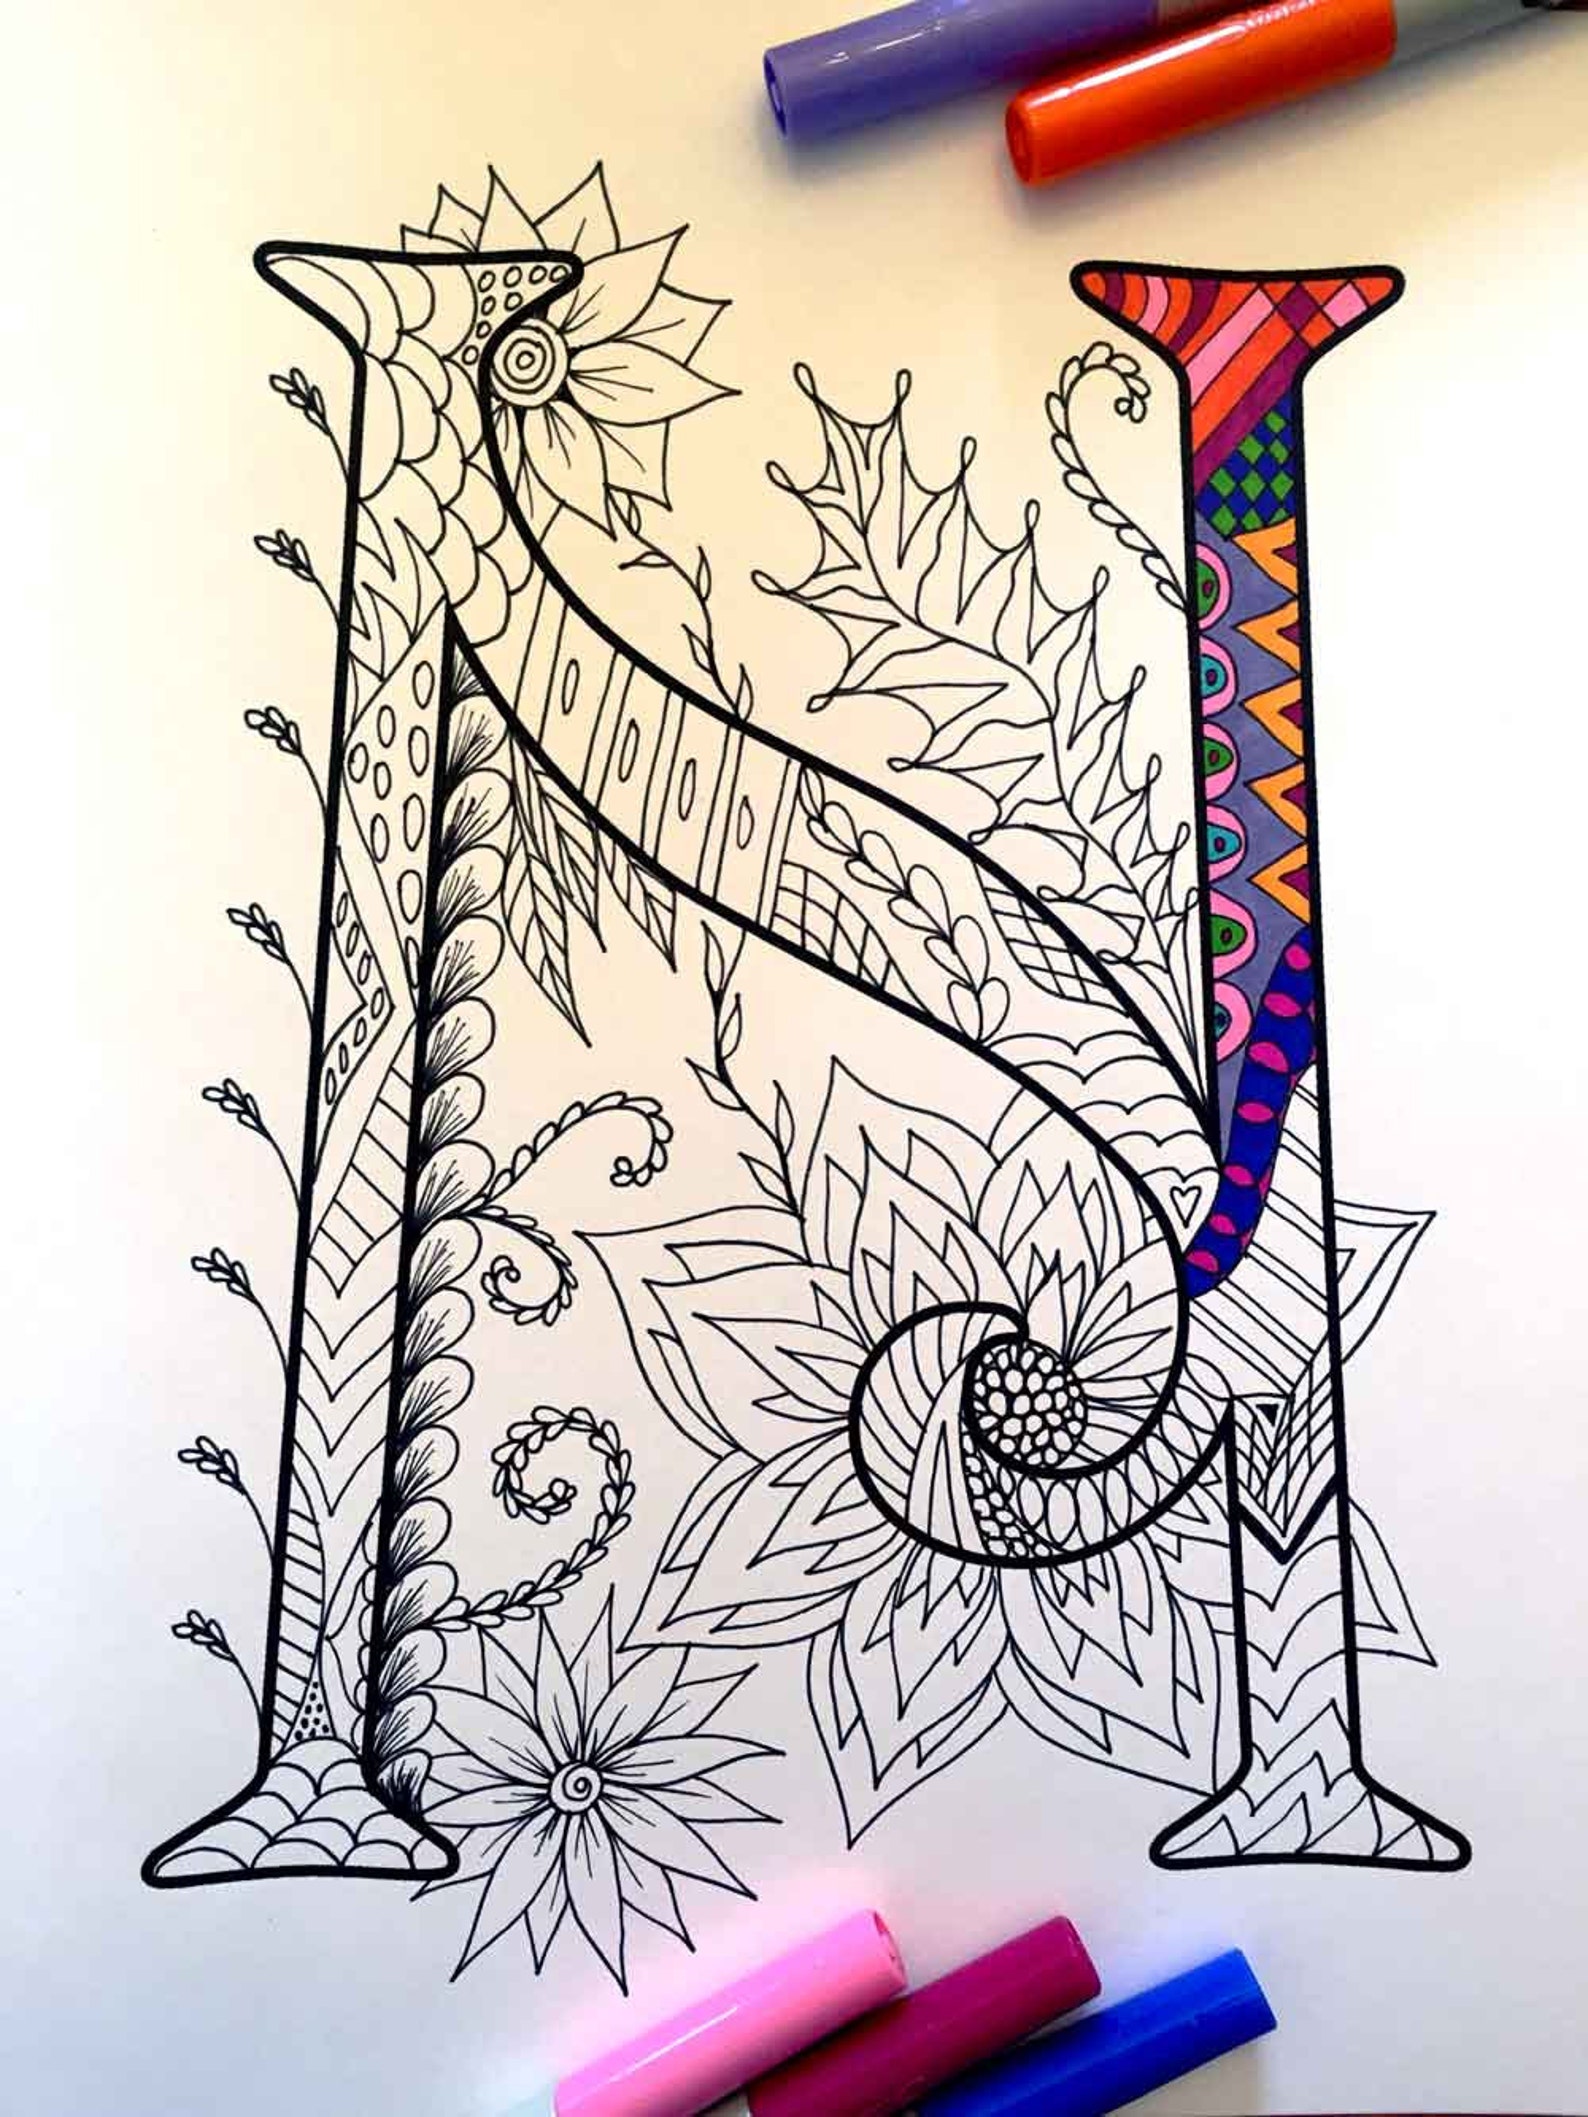 Letter N Coloring Page Inspired by the Font - Etsy